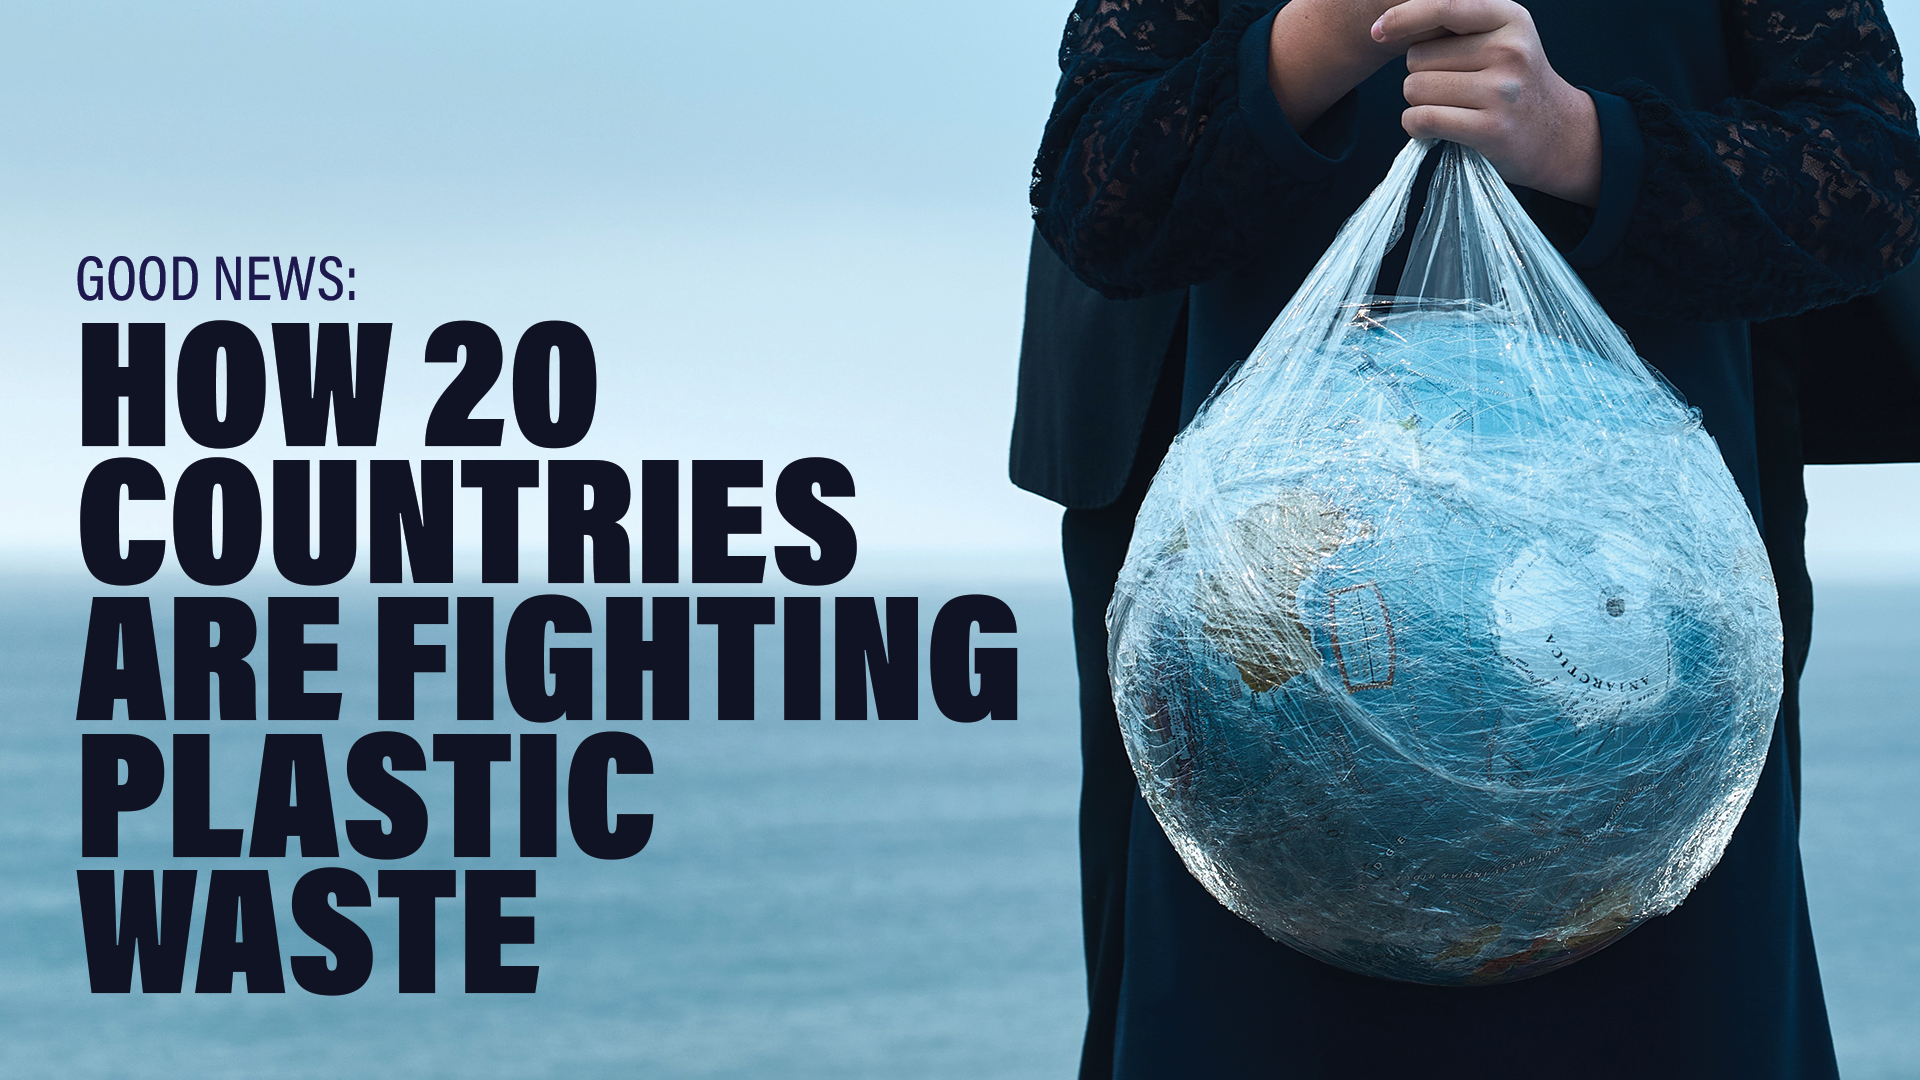 An image of a person holding a clear plastic bag with a globe inside, with the words "Good News: How 20 countries are fighting plastic waste" written on it.